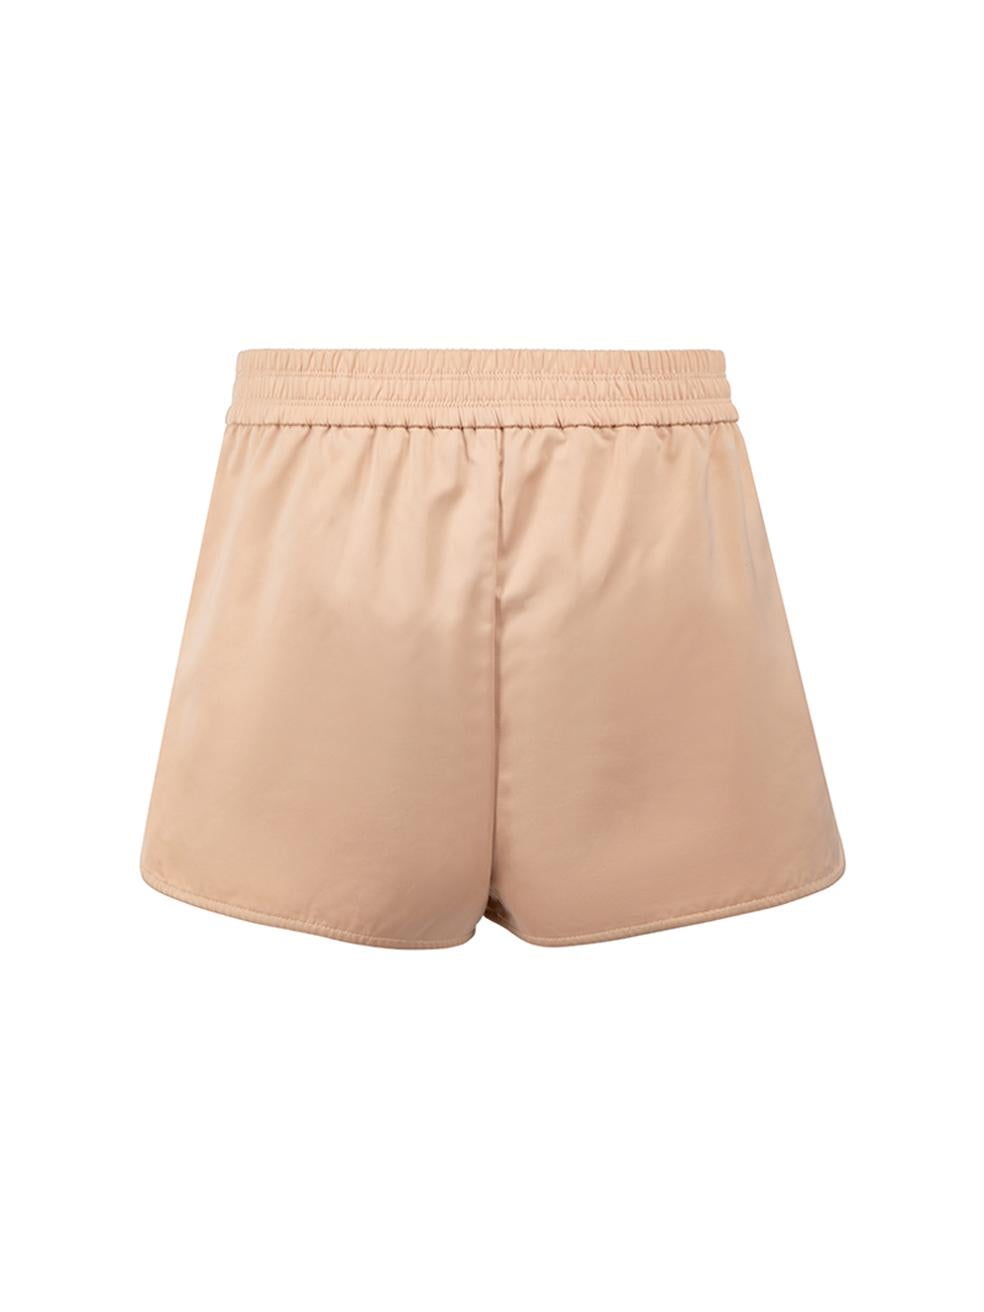 T by Alexander Wang Pink Elastic Waistband Mini Shorts Size S In Good Condition For Sale In London, GB